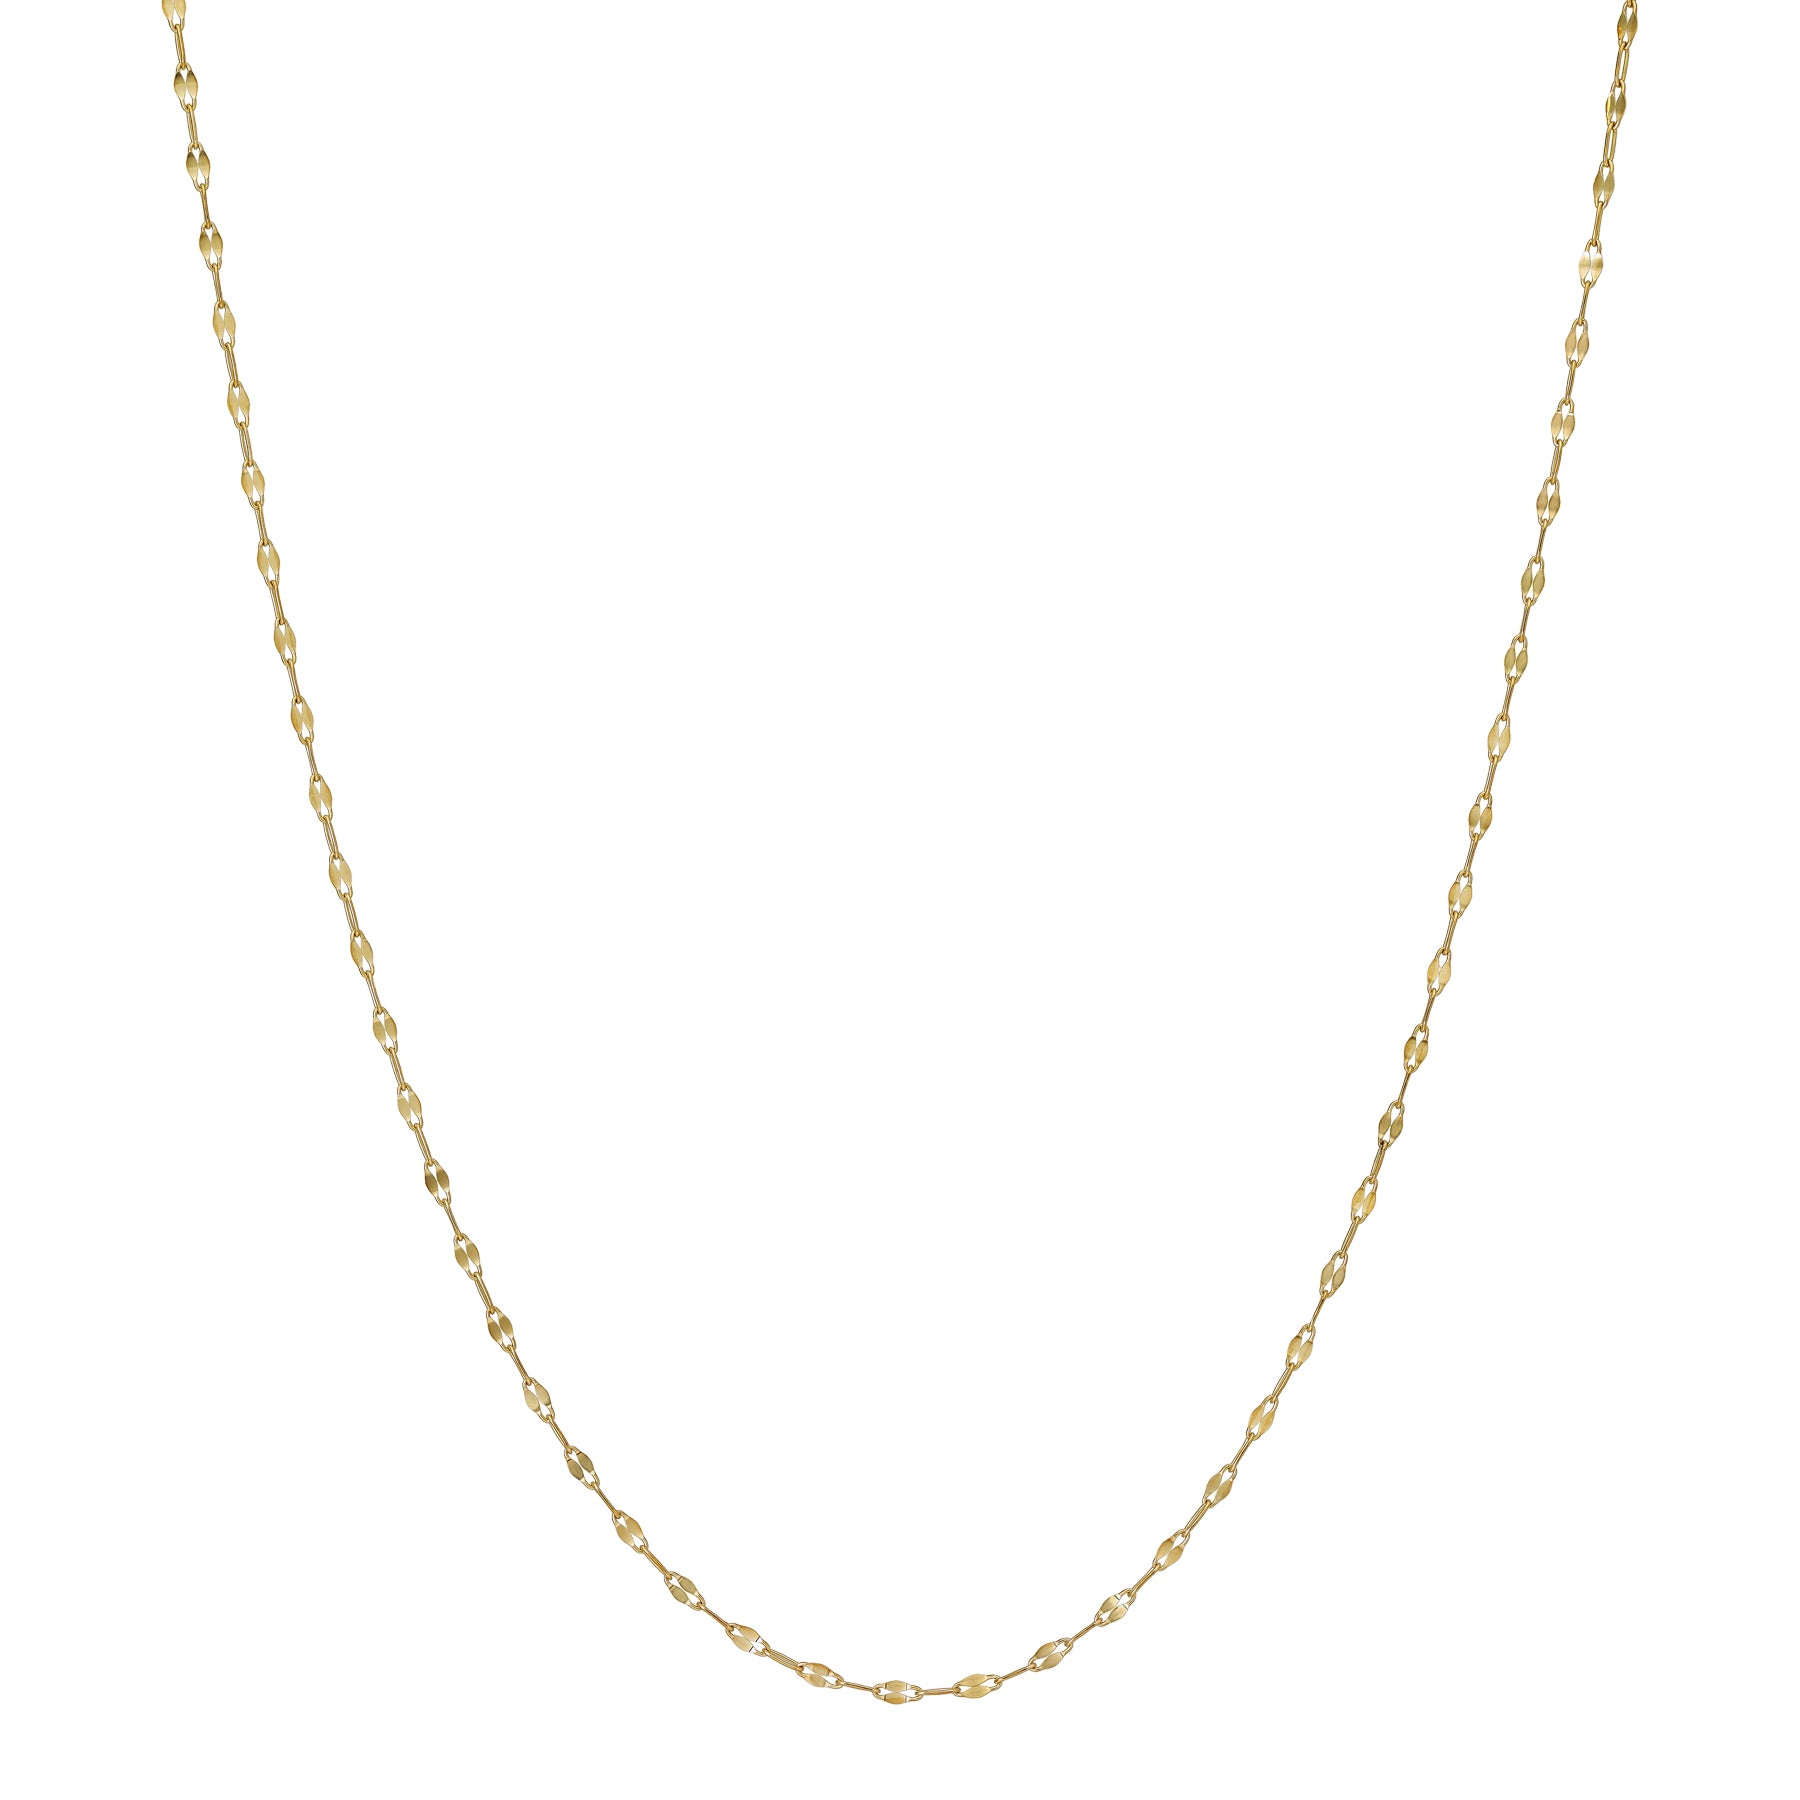 10K Petal Chain Necklace 60cm (Yellow Gold) - Product Image